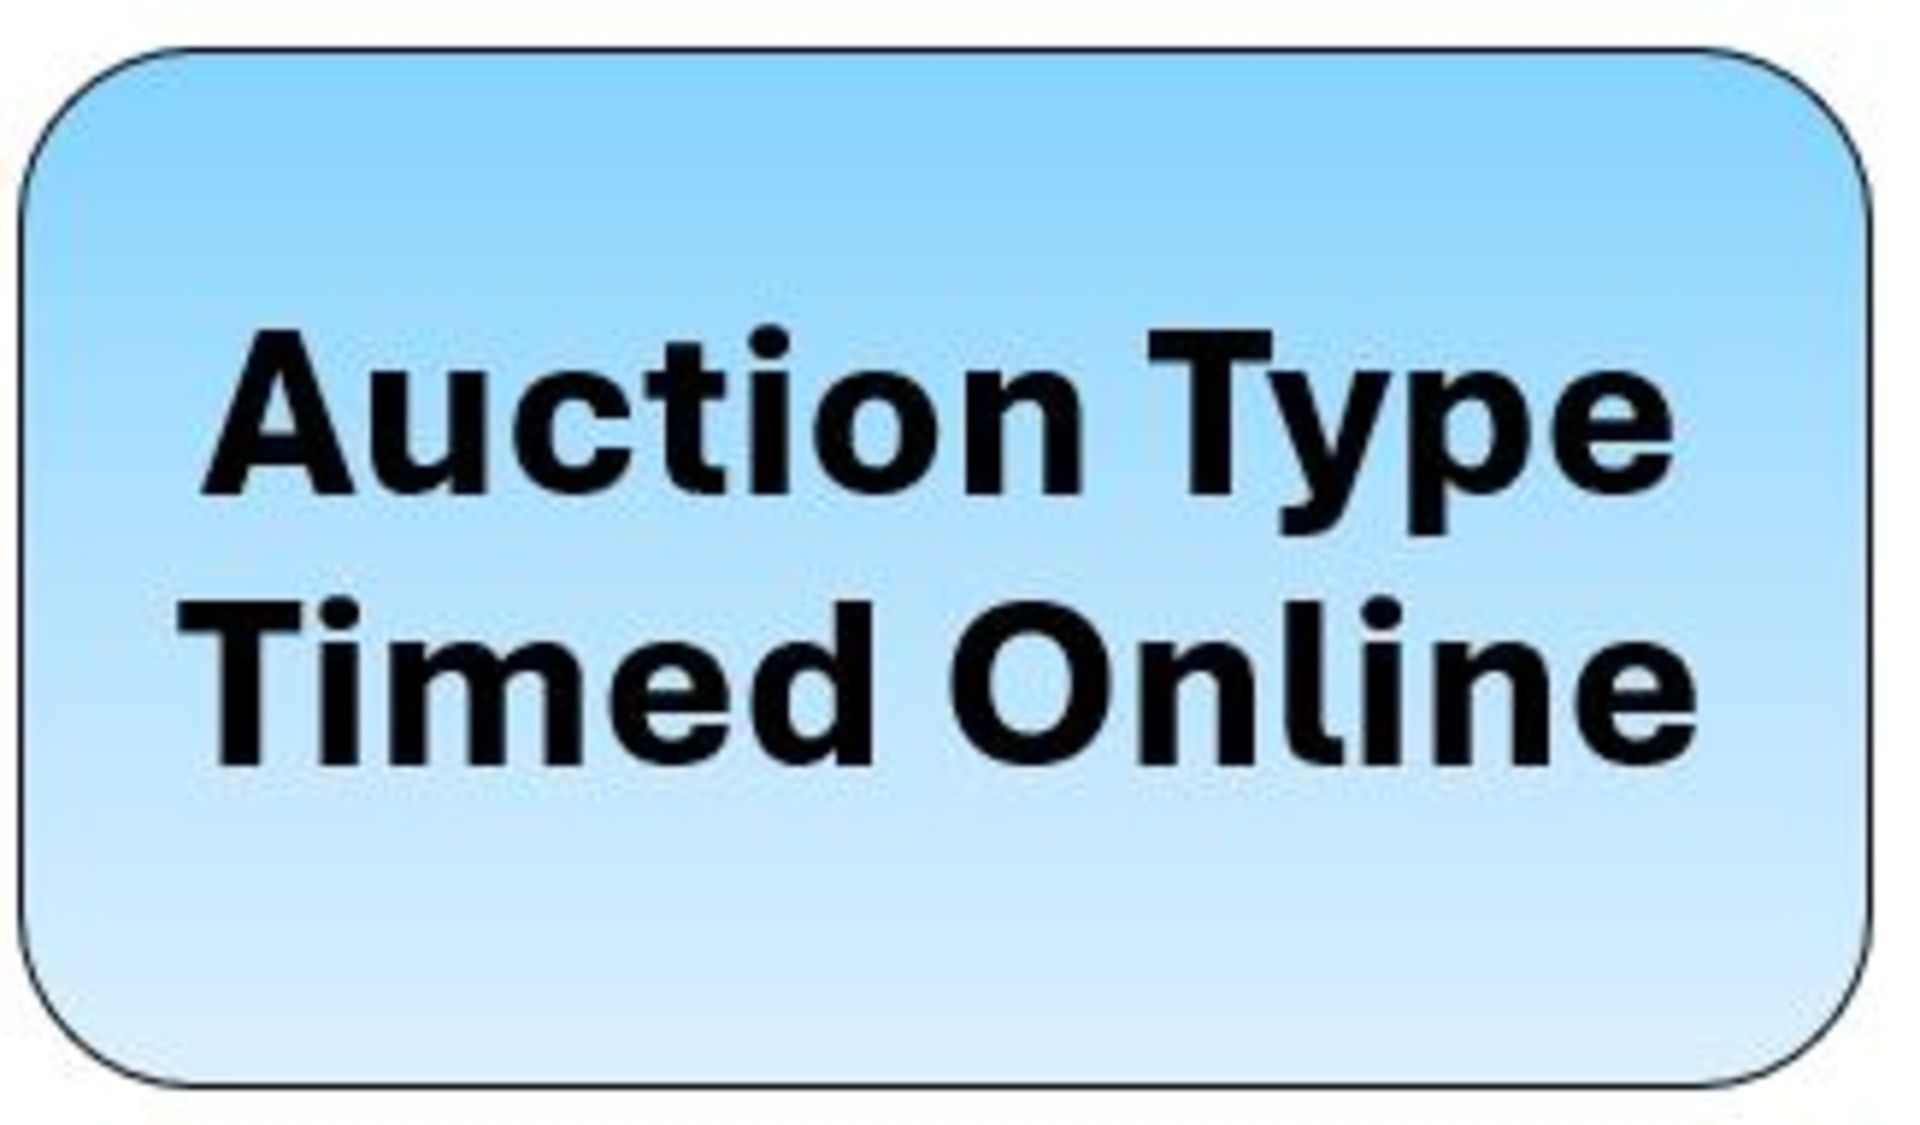 IMPORTANT NOTICE – This is a timed online only auction